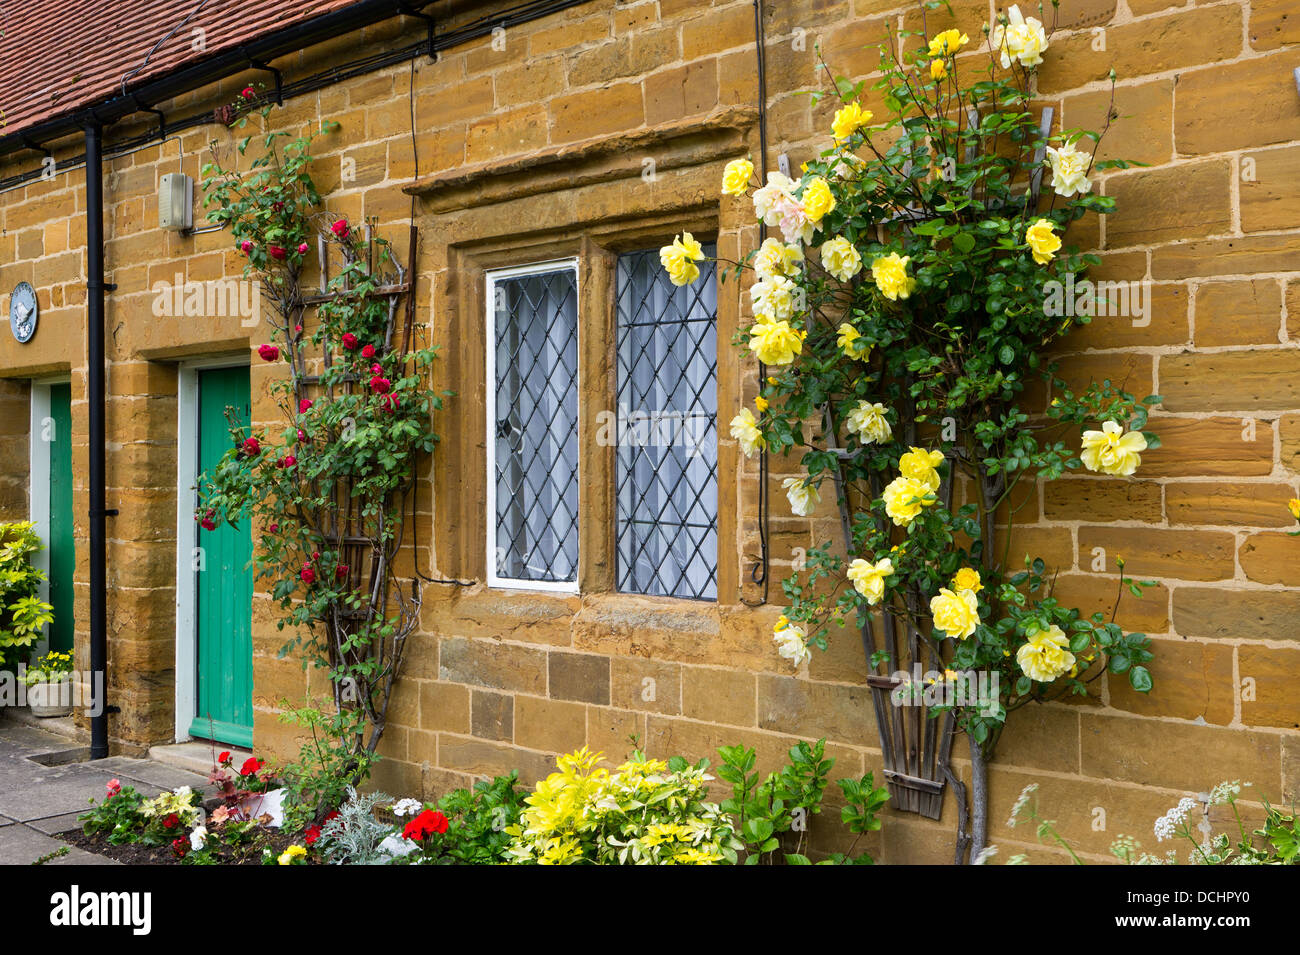 Terrace of old stone cottages with flower borders and roses growing around one window. Stock Photo